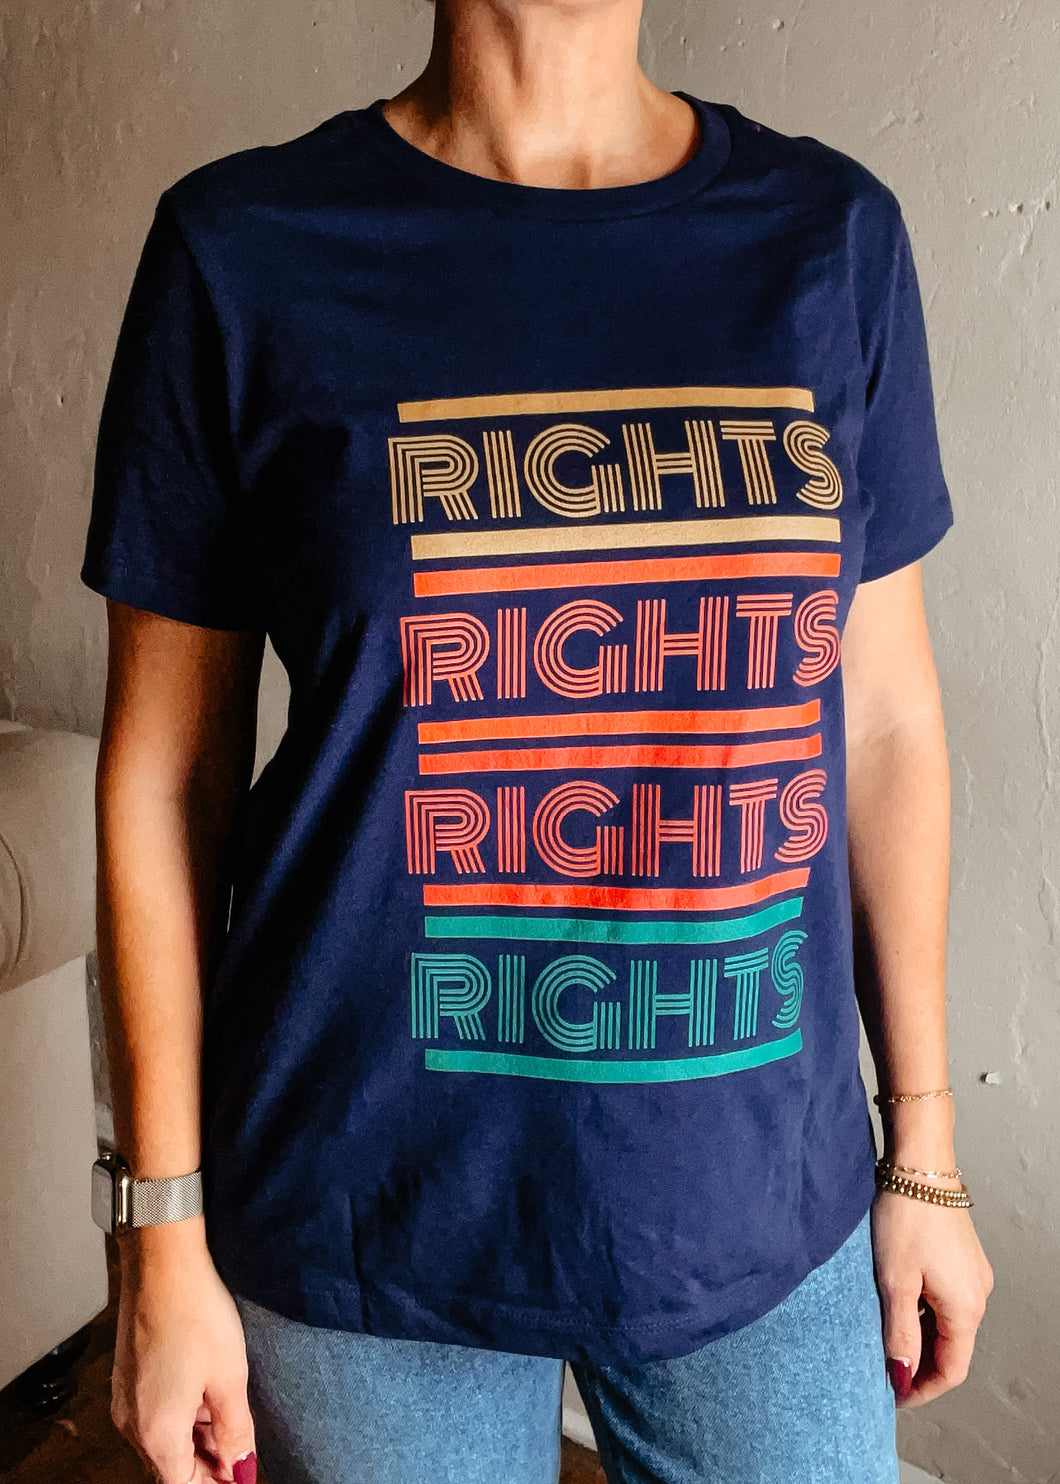 Rights Rights Rights T-Shirt